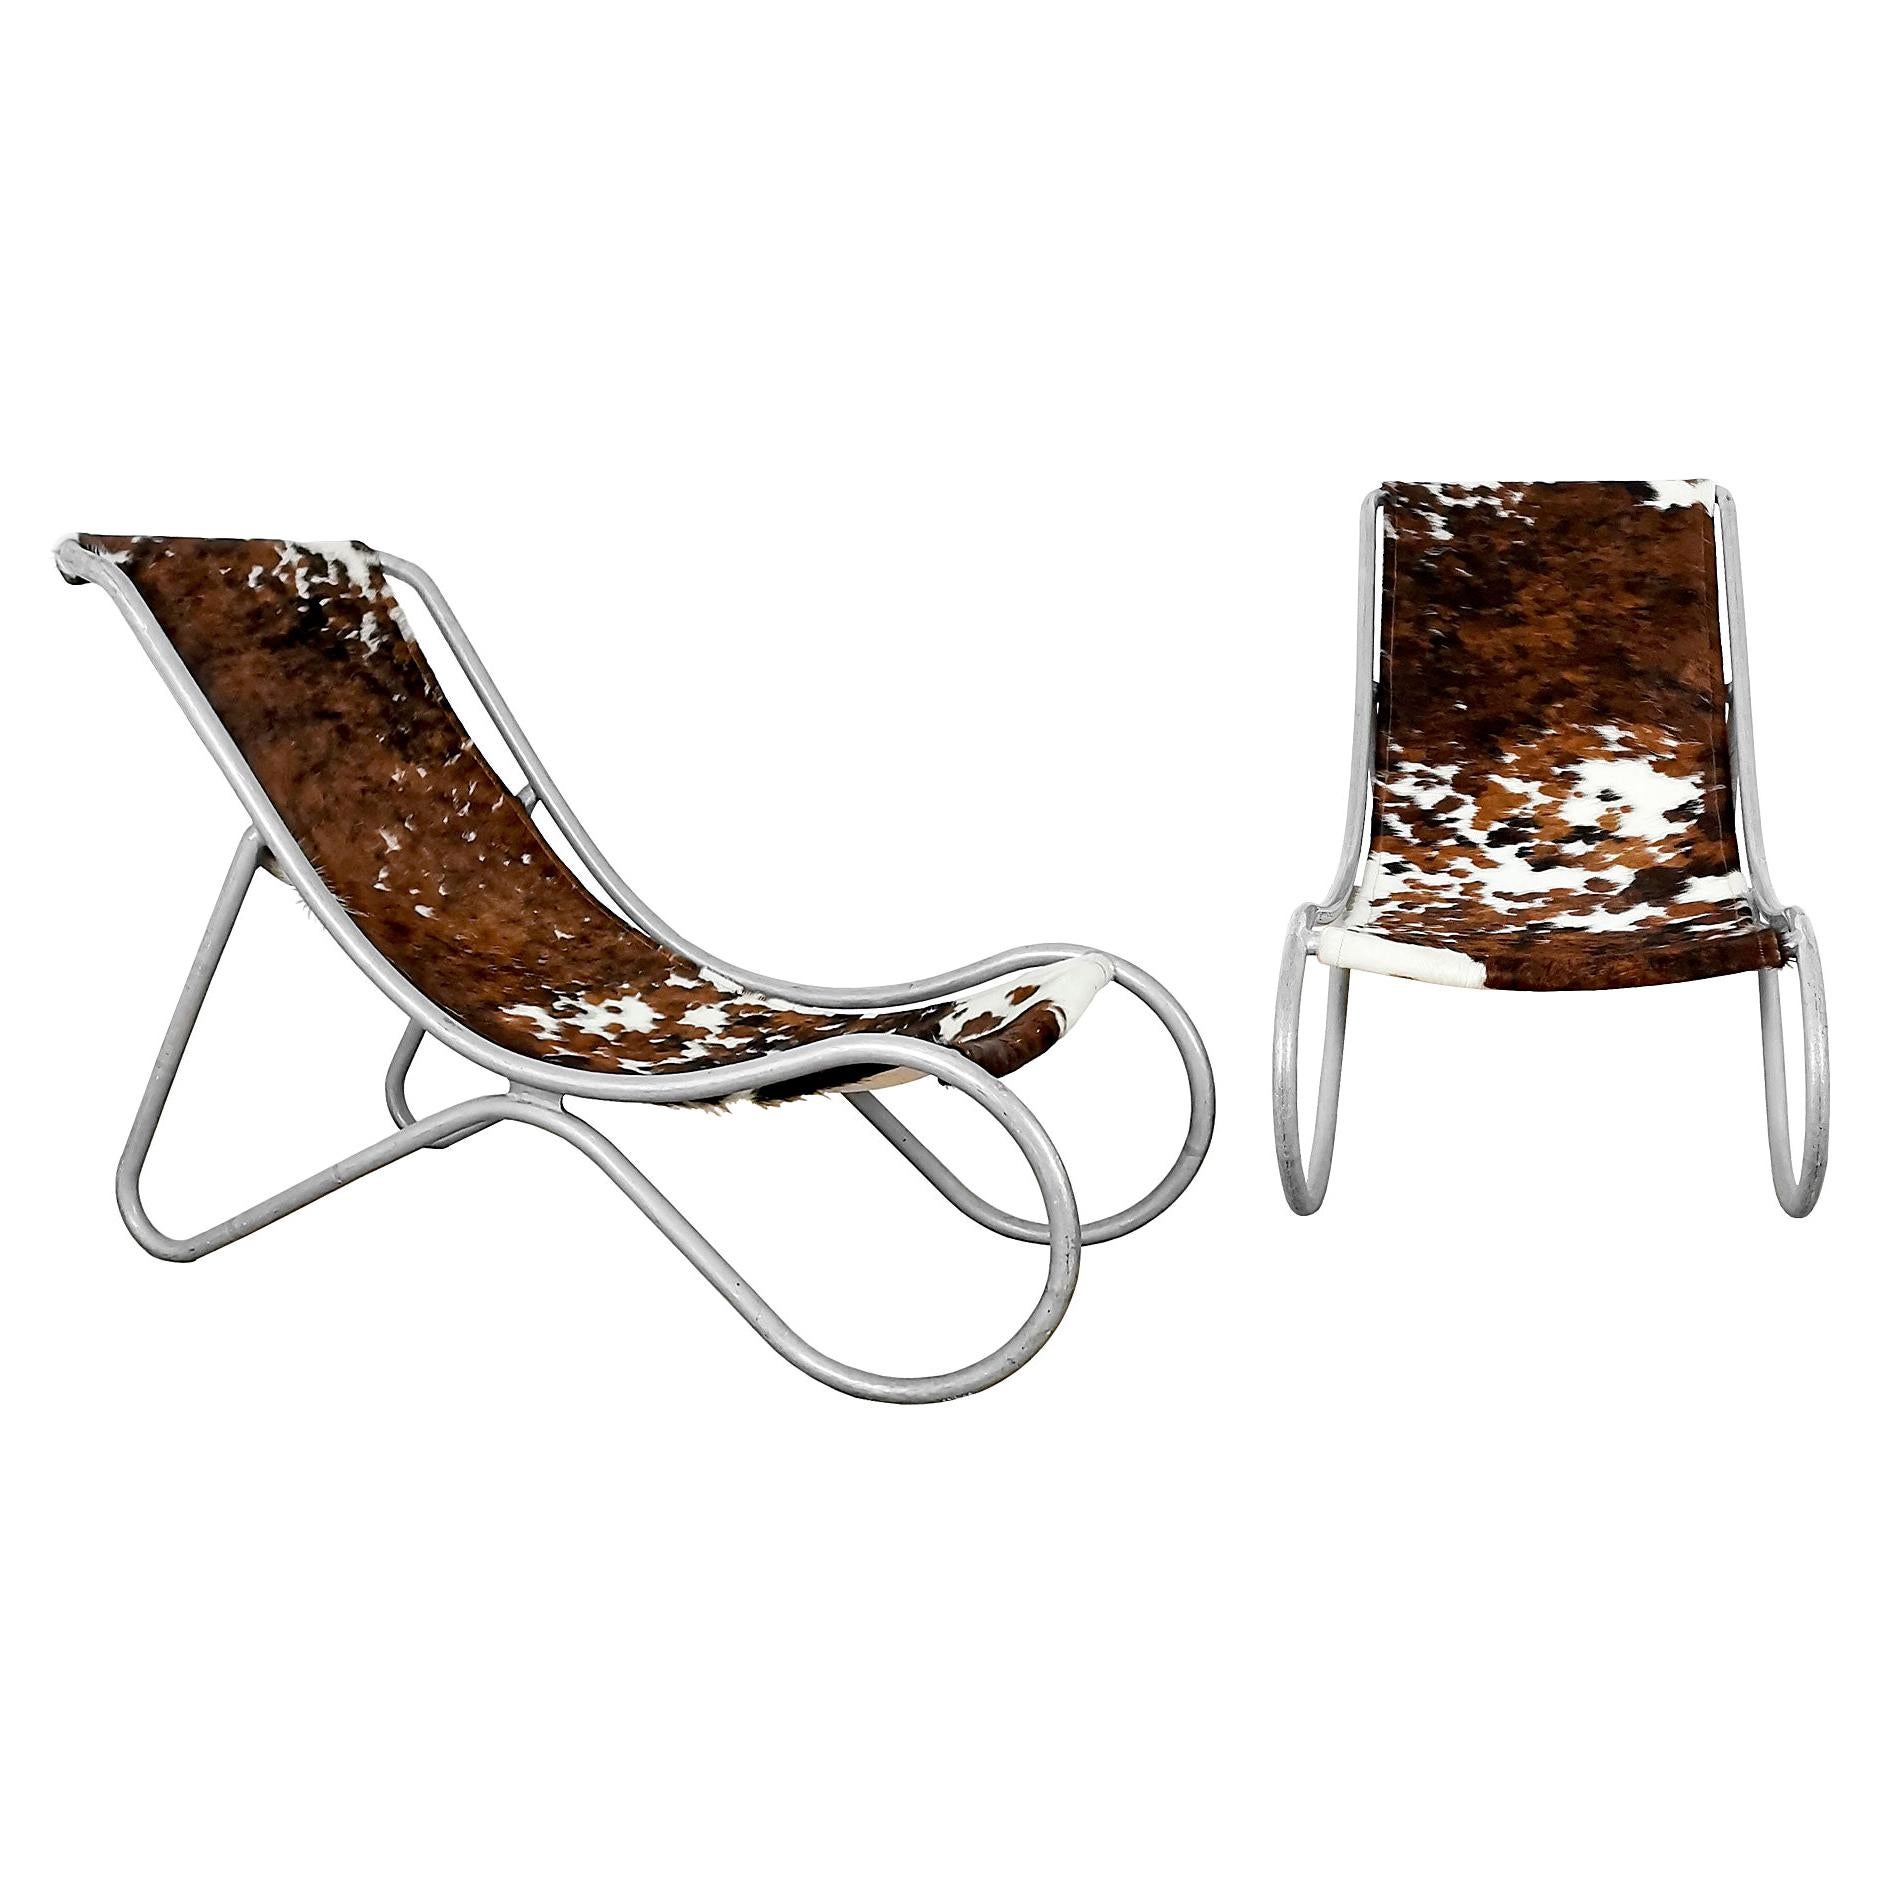 1930´S Pair of Art Deco Deck Chairs in Aluminum and Leather - Italy For Sale